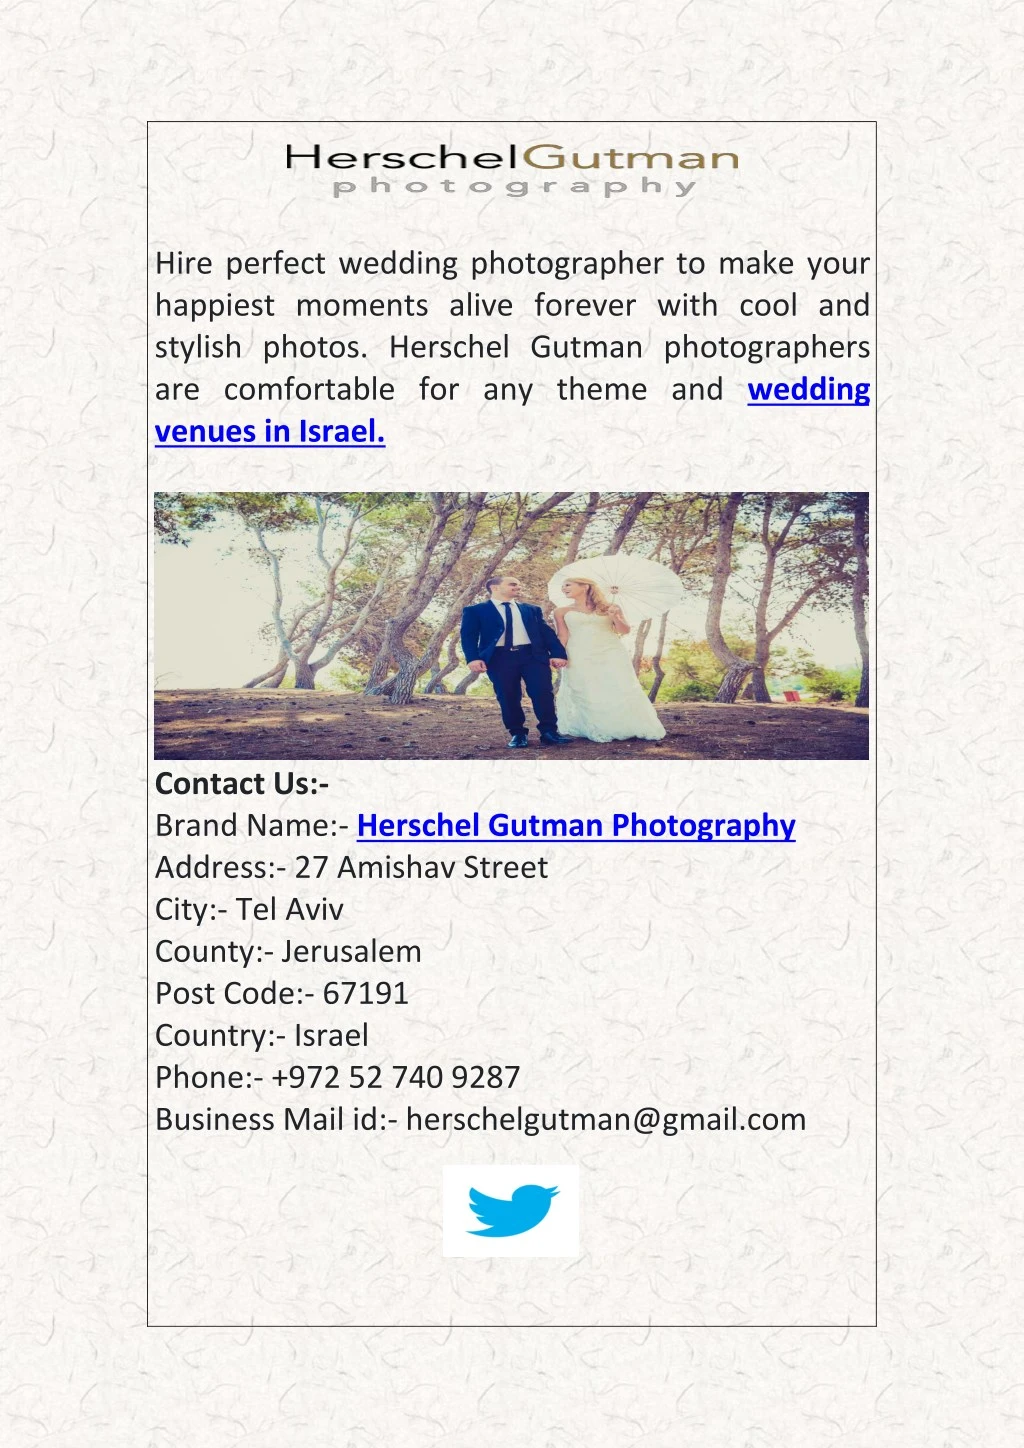 hire perfect wedding photographer to make your